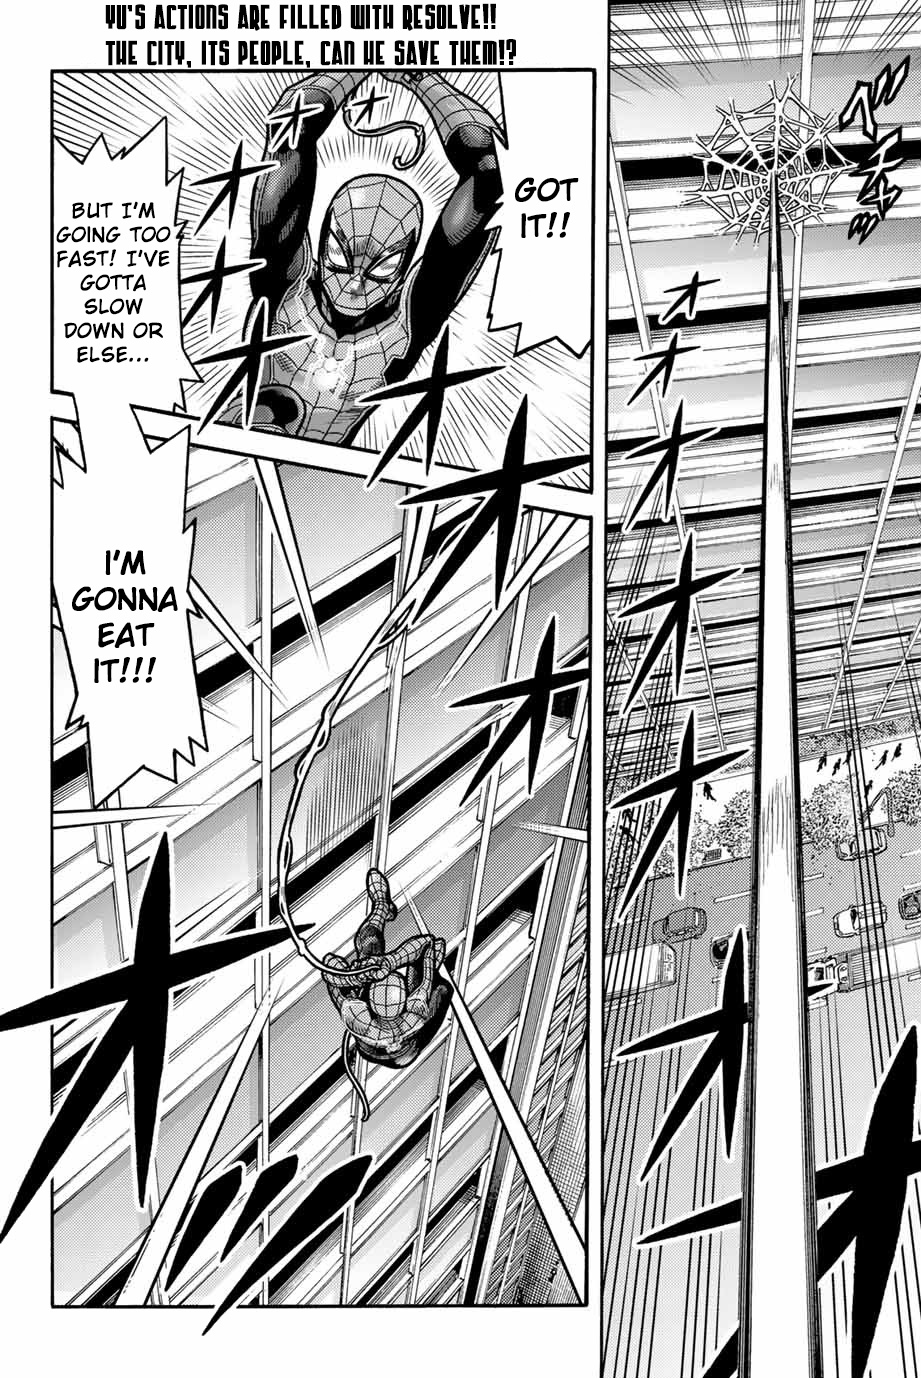 Spider Man: Fake Red Vol. 1 Ch. 8 No Power, No Responsibility, Just...